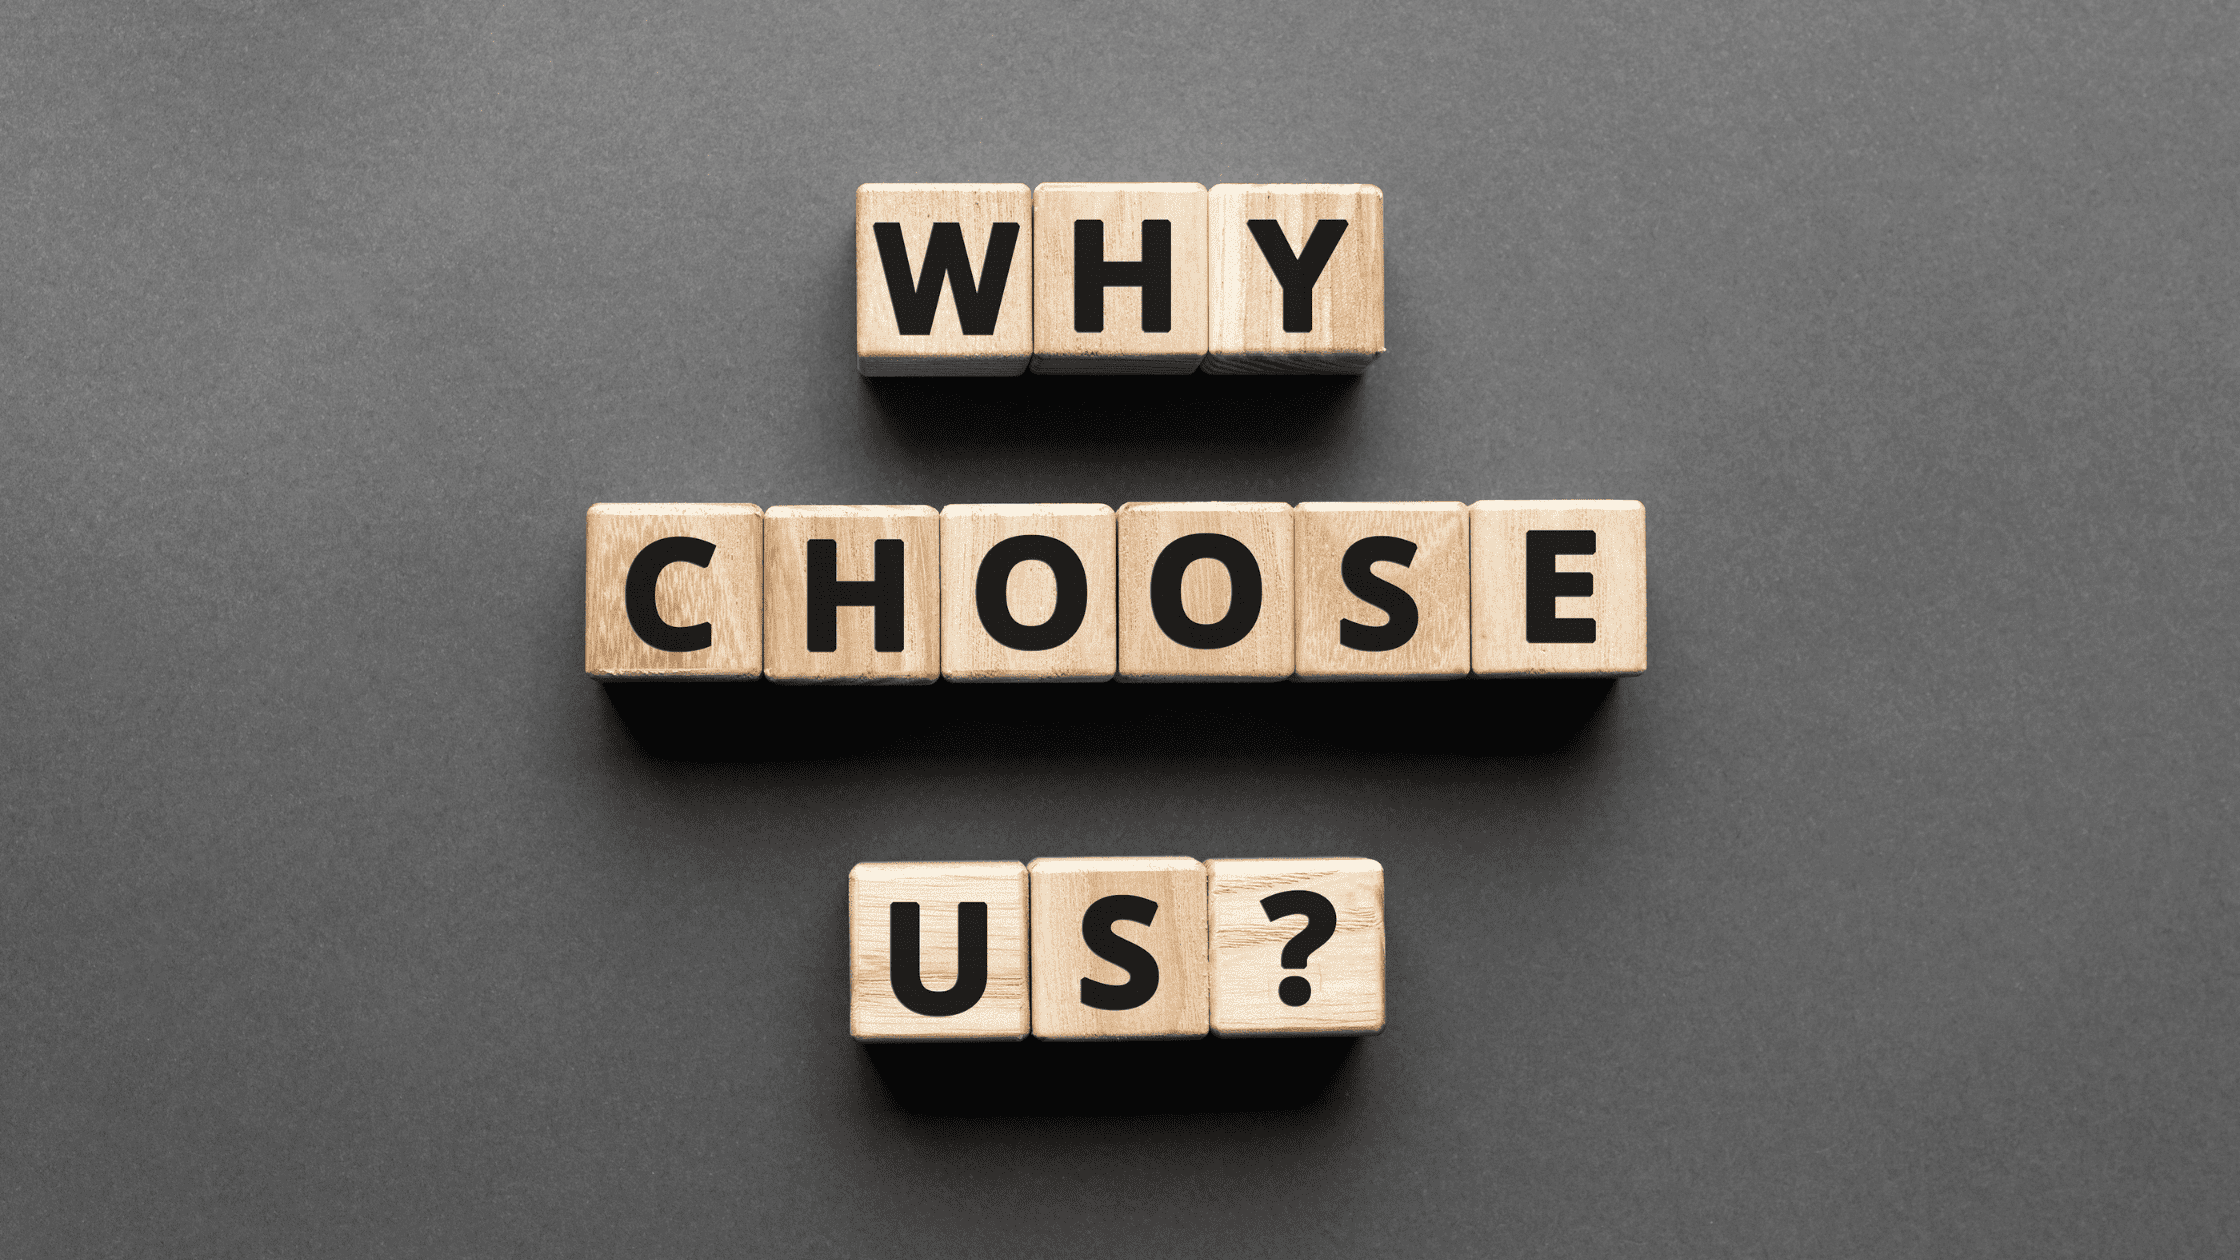 Blocks with letters forming the phrase “Why Choose Us?”